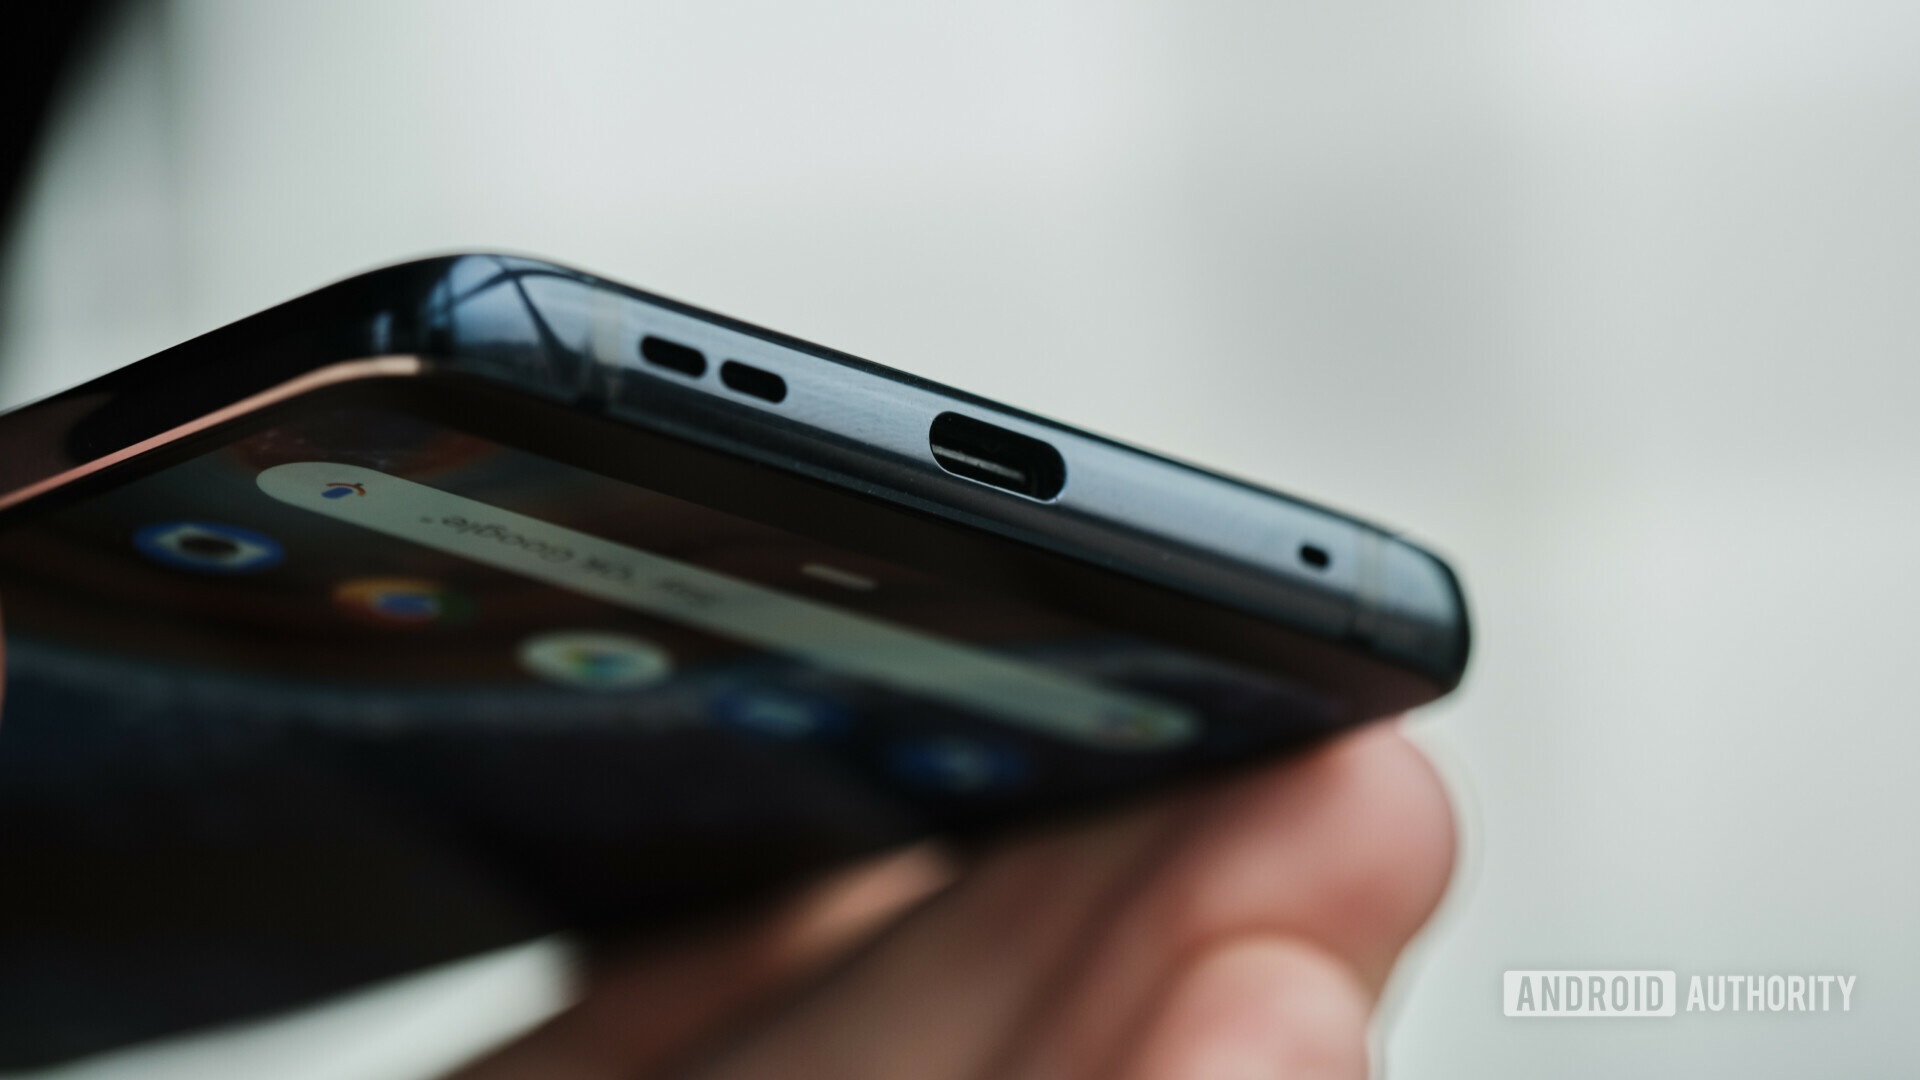 Bottom side of the Nokia 9 PureView showing the USB Type-C port.